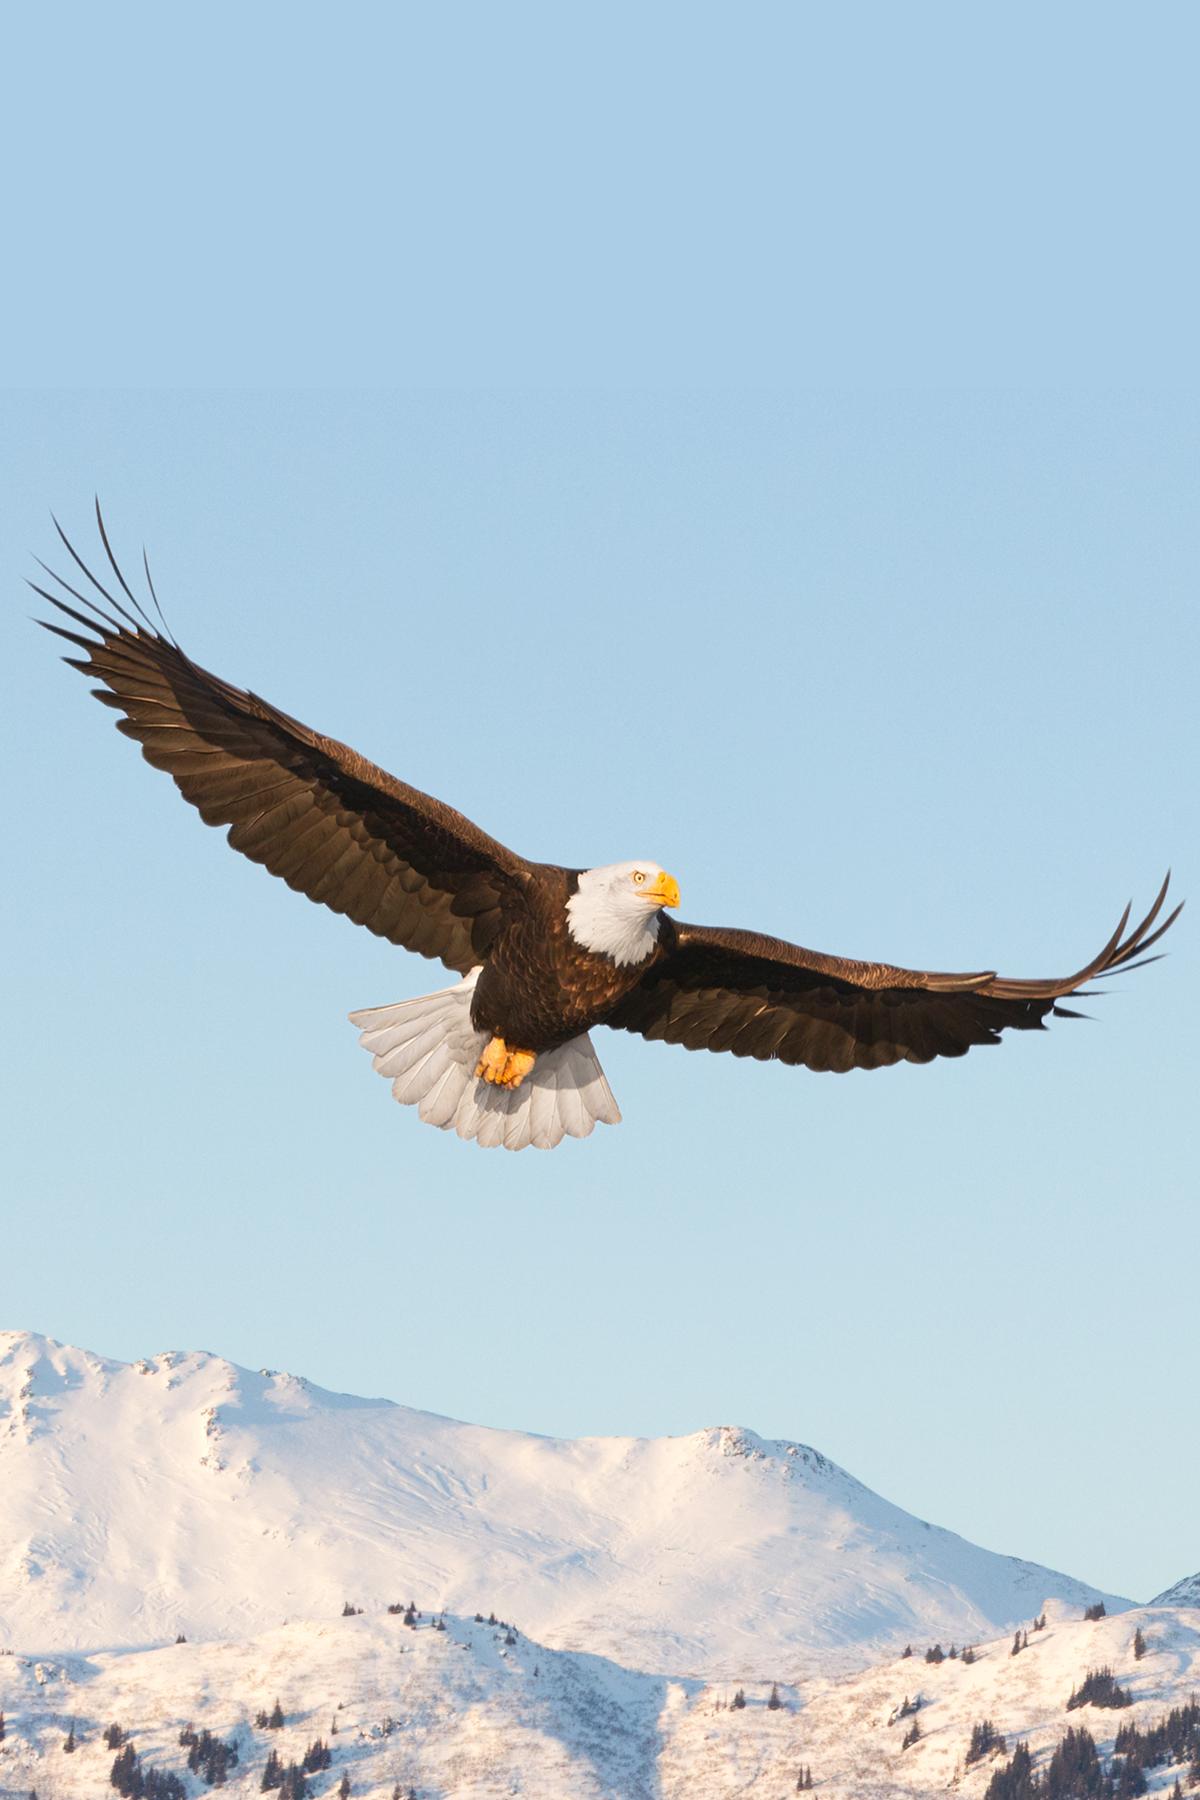 Eagle flying in the sky